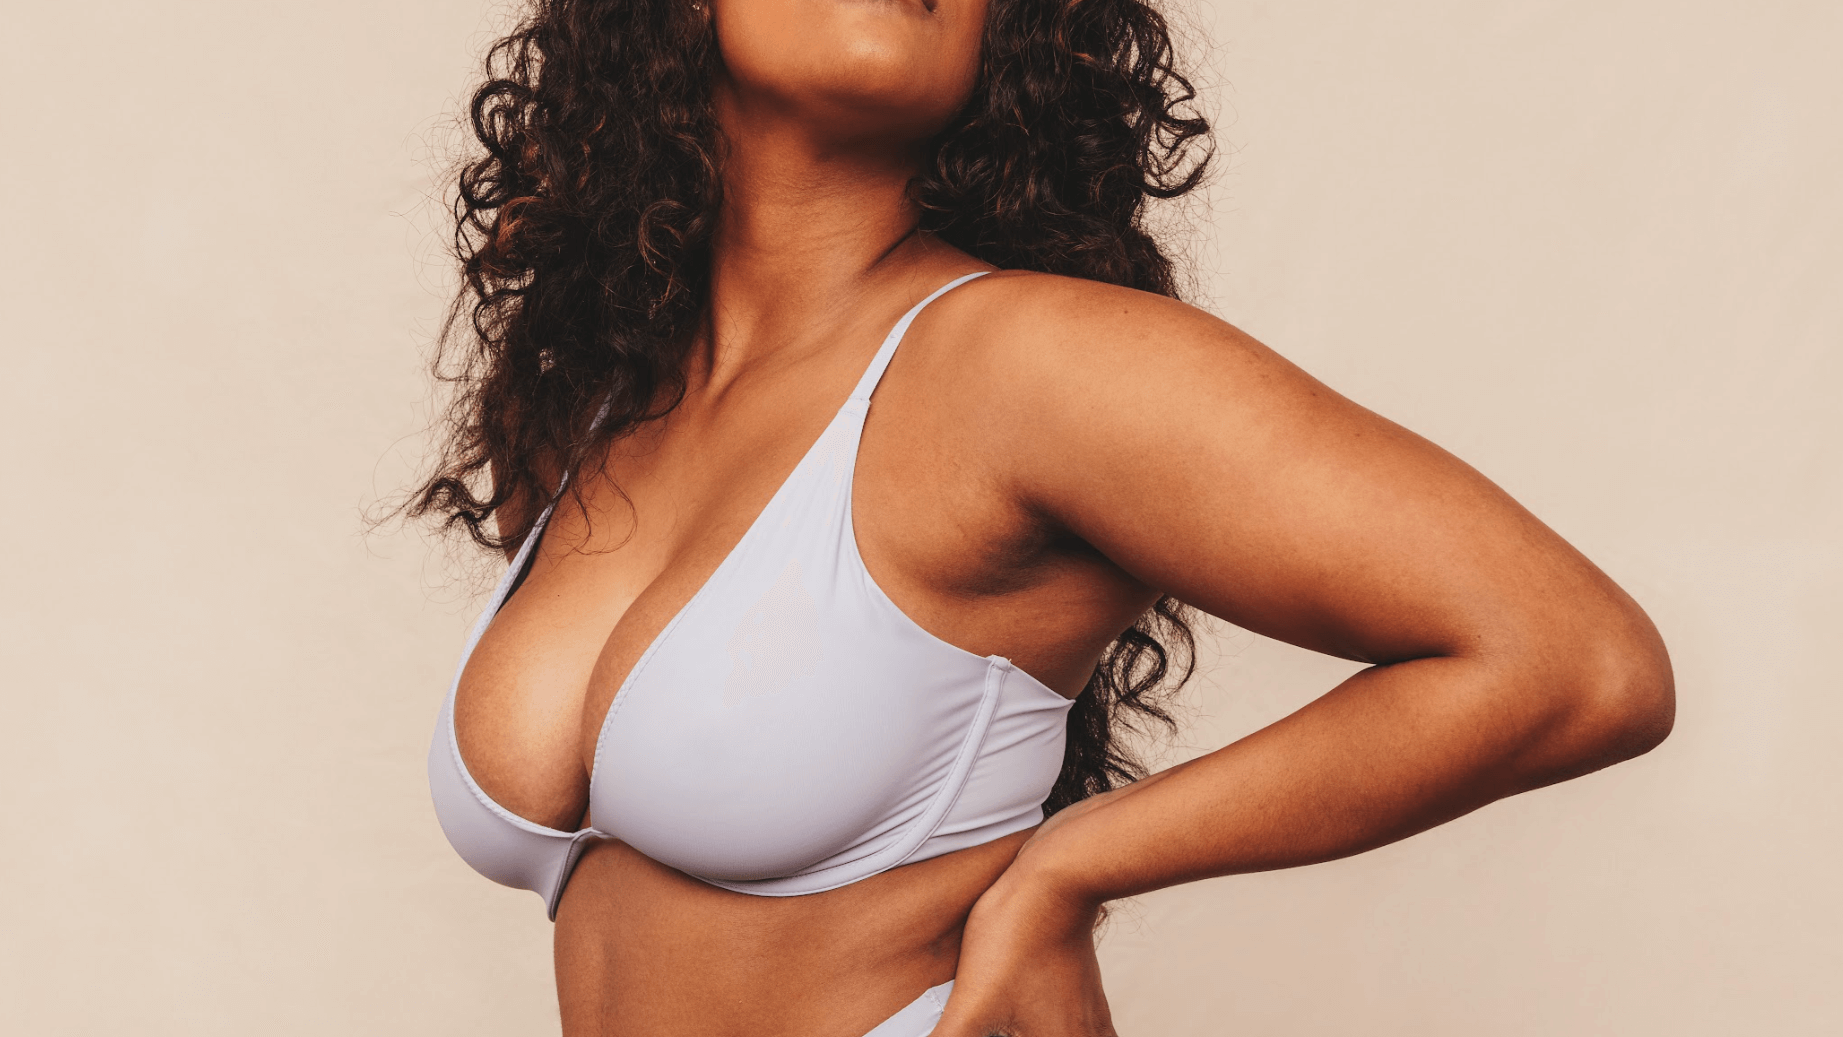 Fat Transfer Breast Augmentation: All You Need To Know 2024